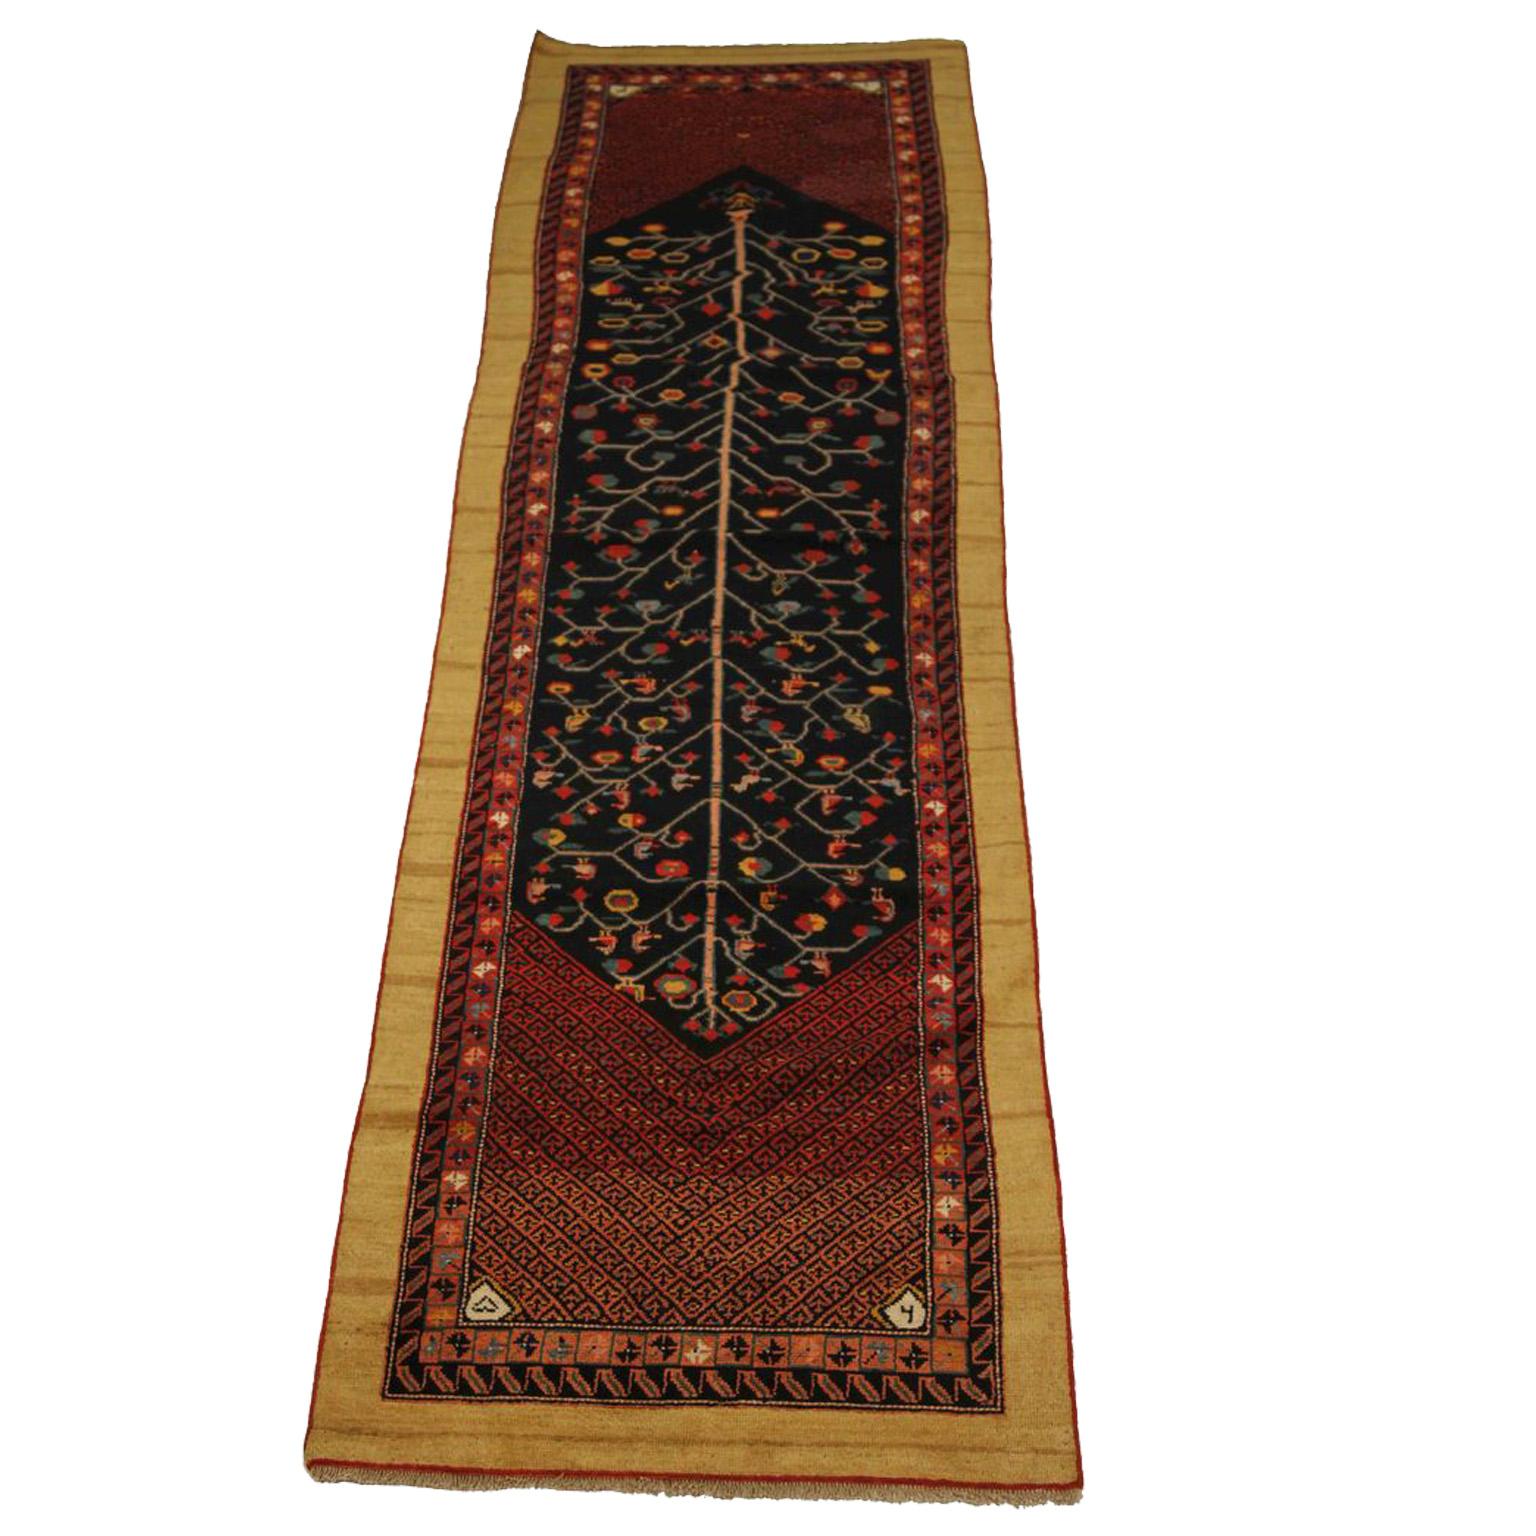 Antique Persian rug made of fine camel hair featuring ornate animal and geometric patterns which are traditional designs commonly used by weavers in Bakhtiari. It has a deep black, red, and ivory color palette that would look plush in modern and